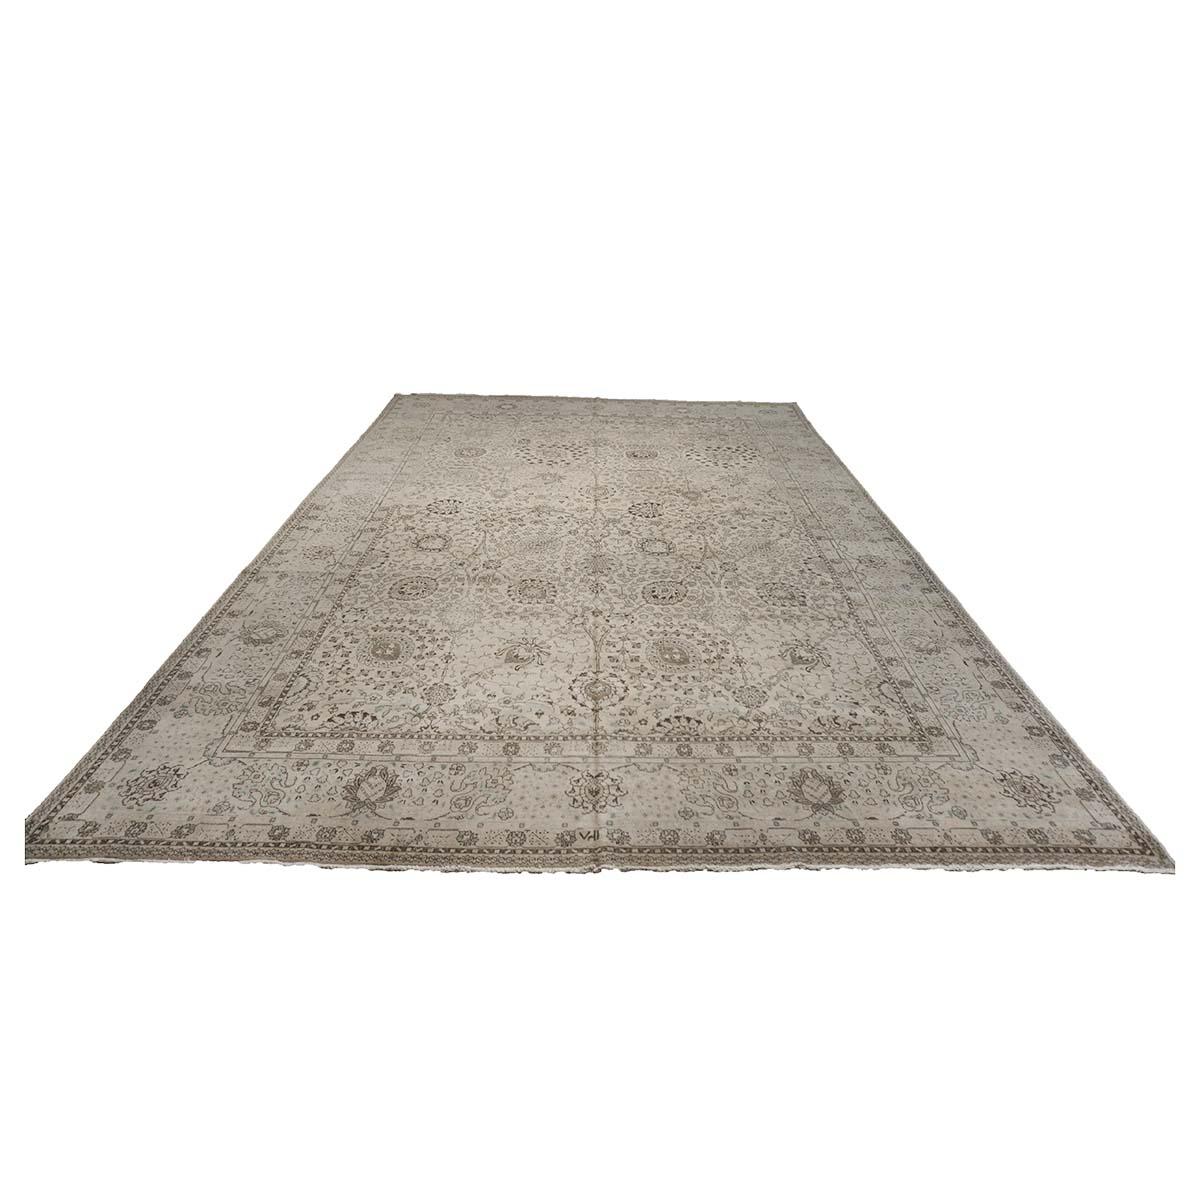 Ashly Fine Rugs presents a 1920s Antique Persian Tabriz 12x19 Ivory Handmade Area Rug. Tabriz is a northern city in modern-day Iran and has forever been famous for the fineness and craftsmanship of its handmade rugs. This piece has a beautiful